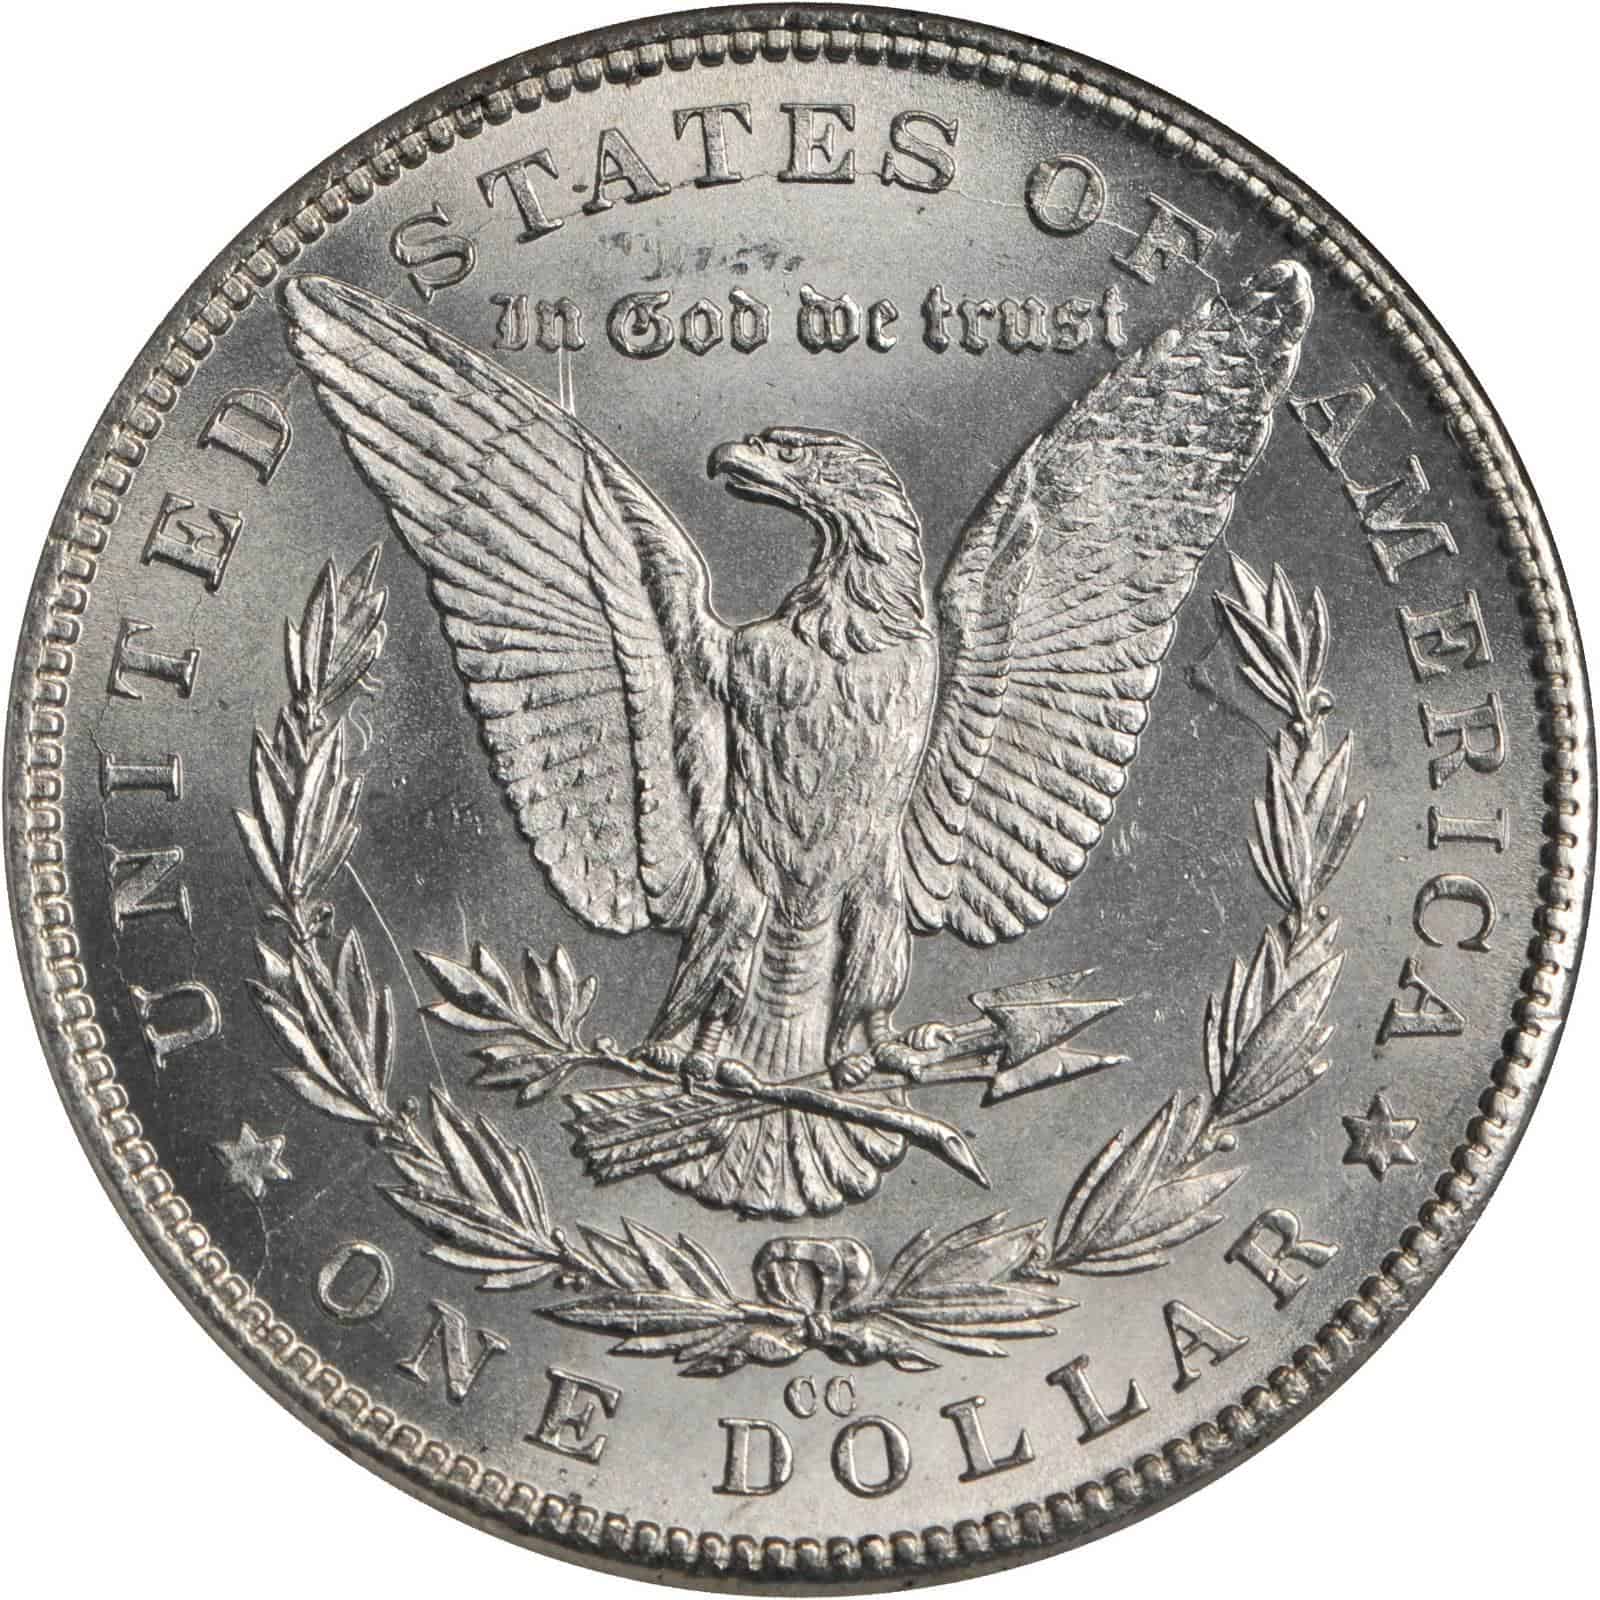 The Reverse of the 1889 Silver Dollar